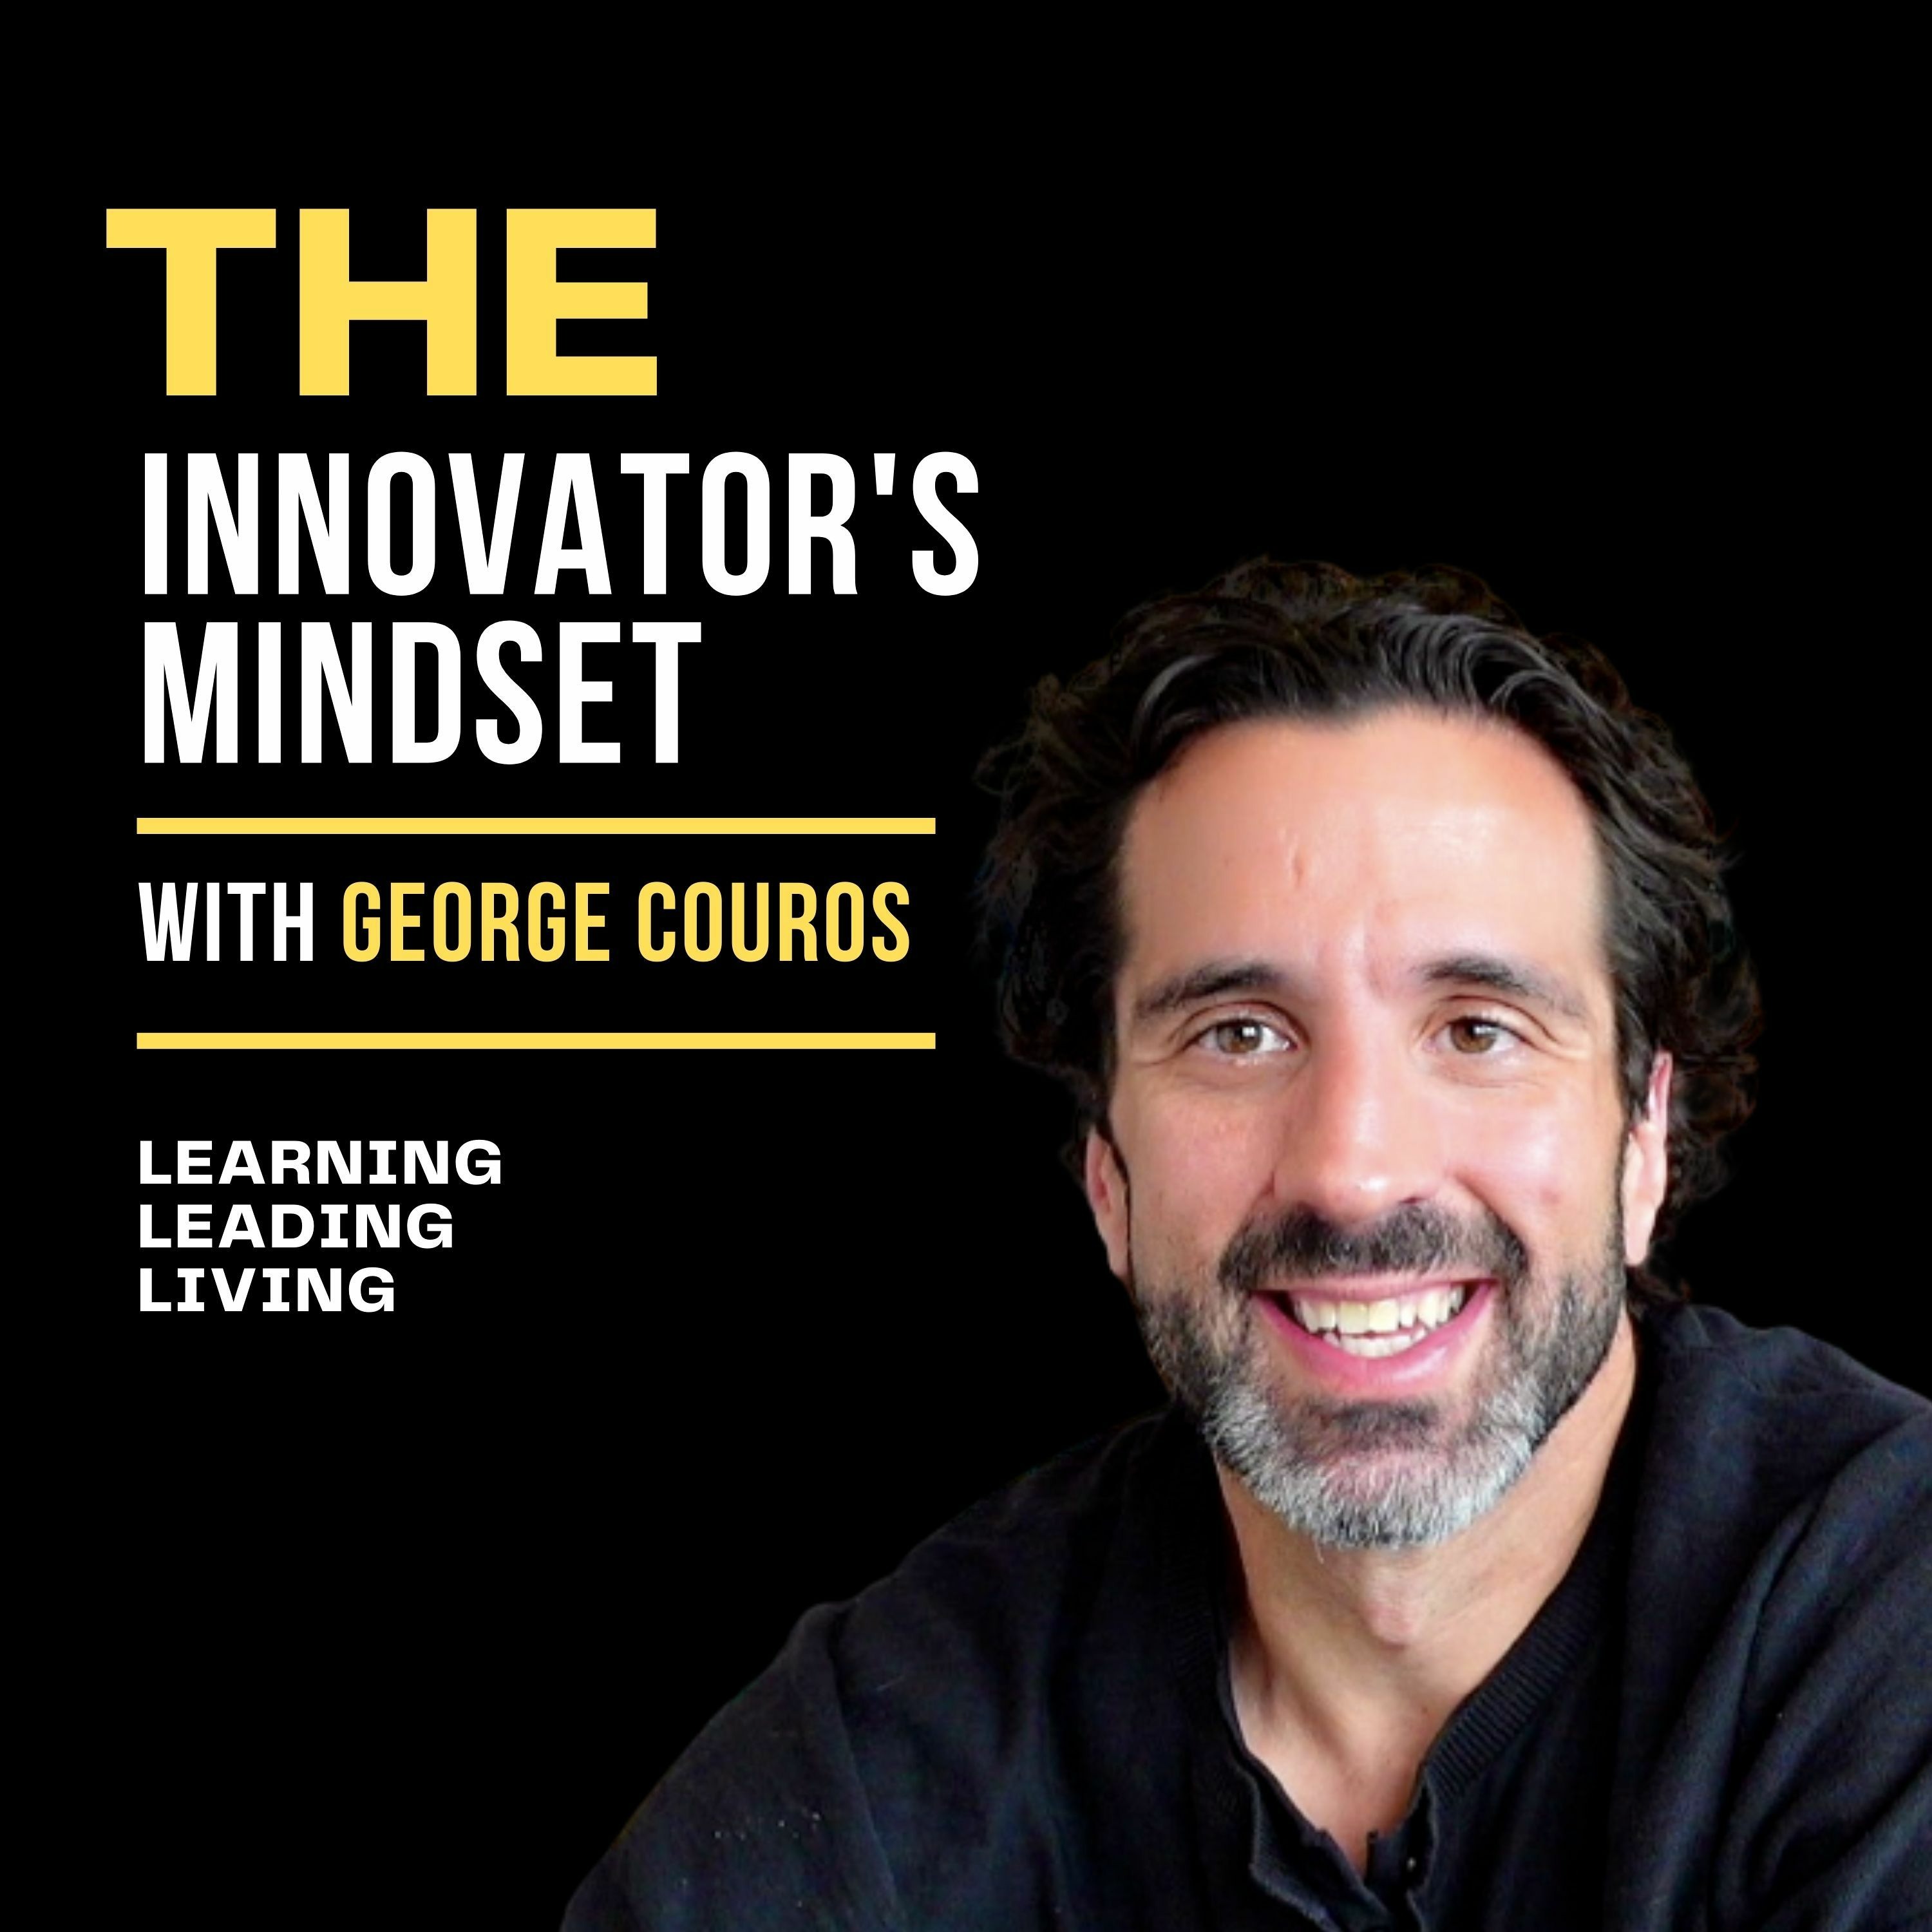 3 Questions on Educators that Inspire with Eric Sheninger - The #InnovatorsMindset #Podcast